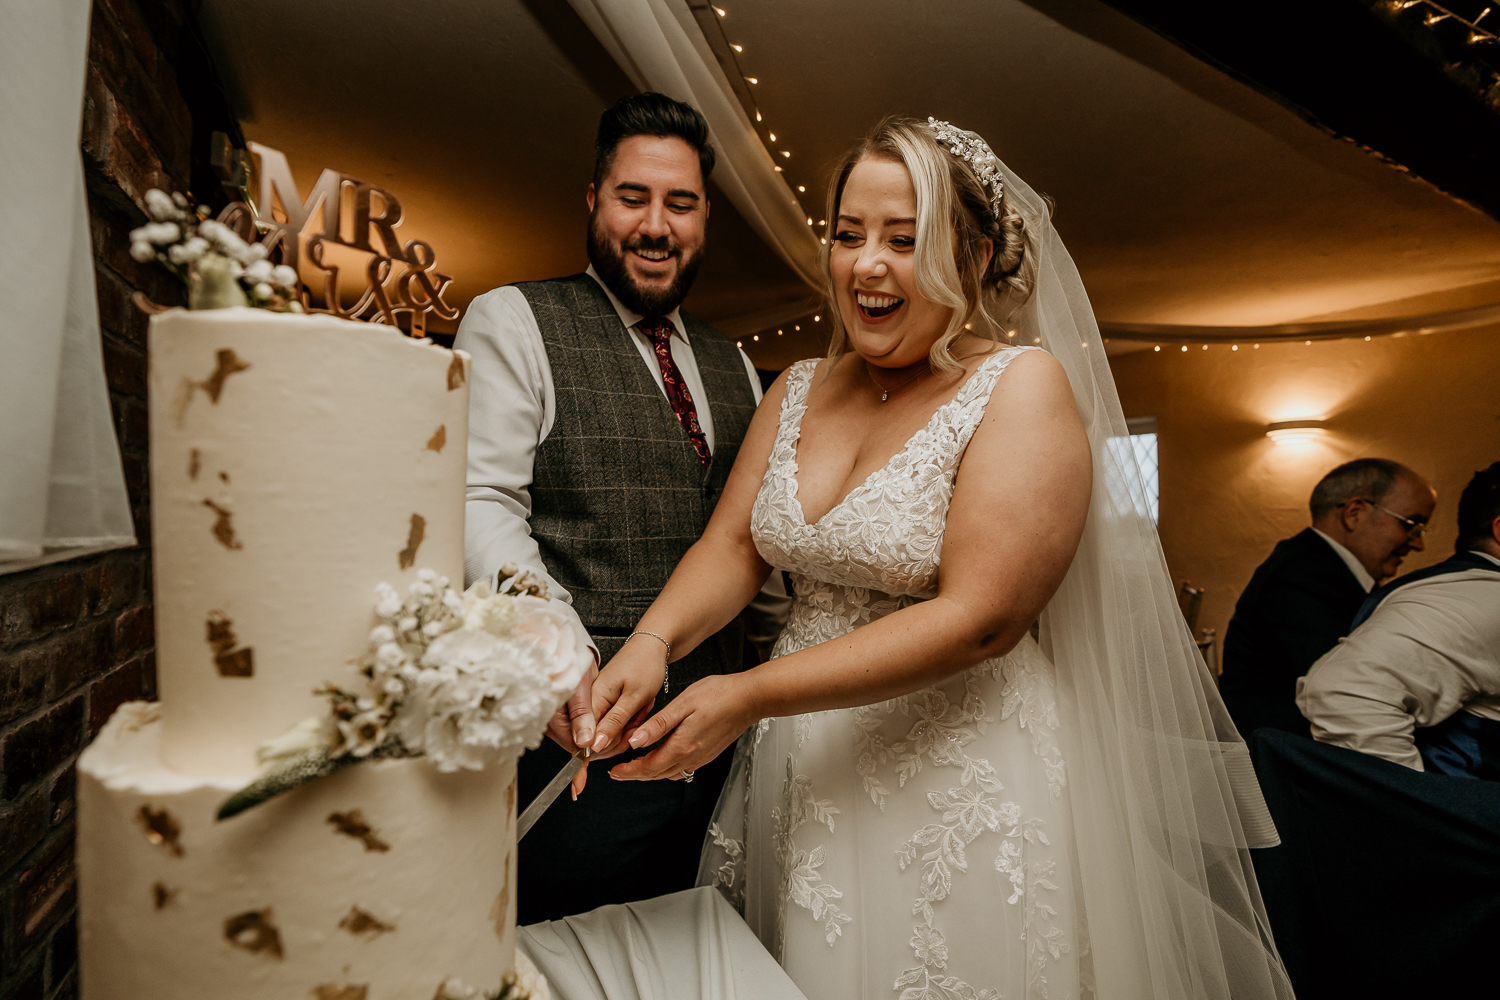 cake cut at wedding at fox and goos e in chesterfield